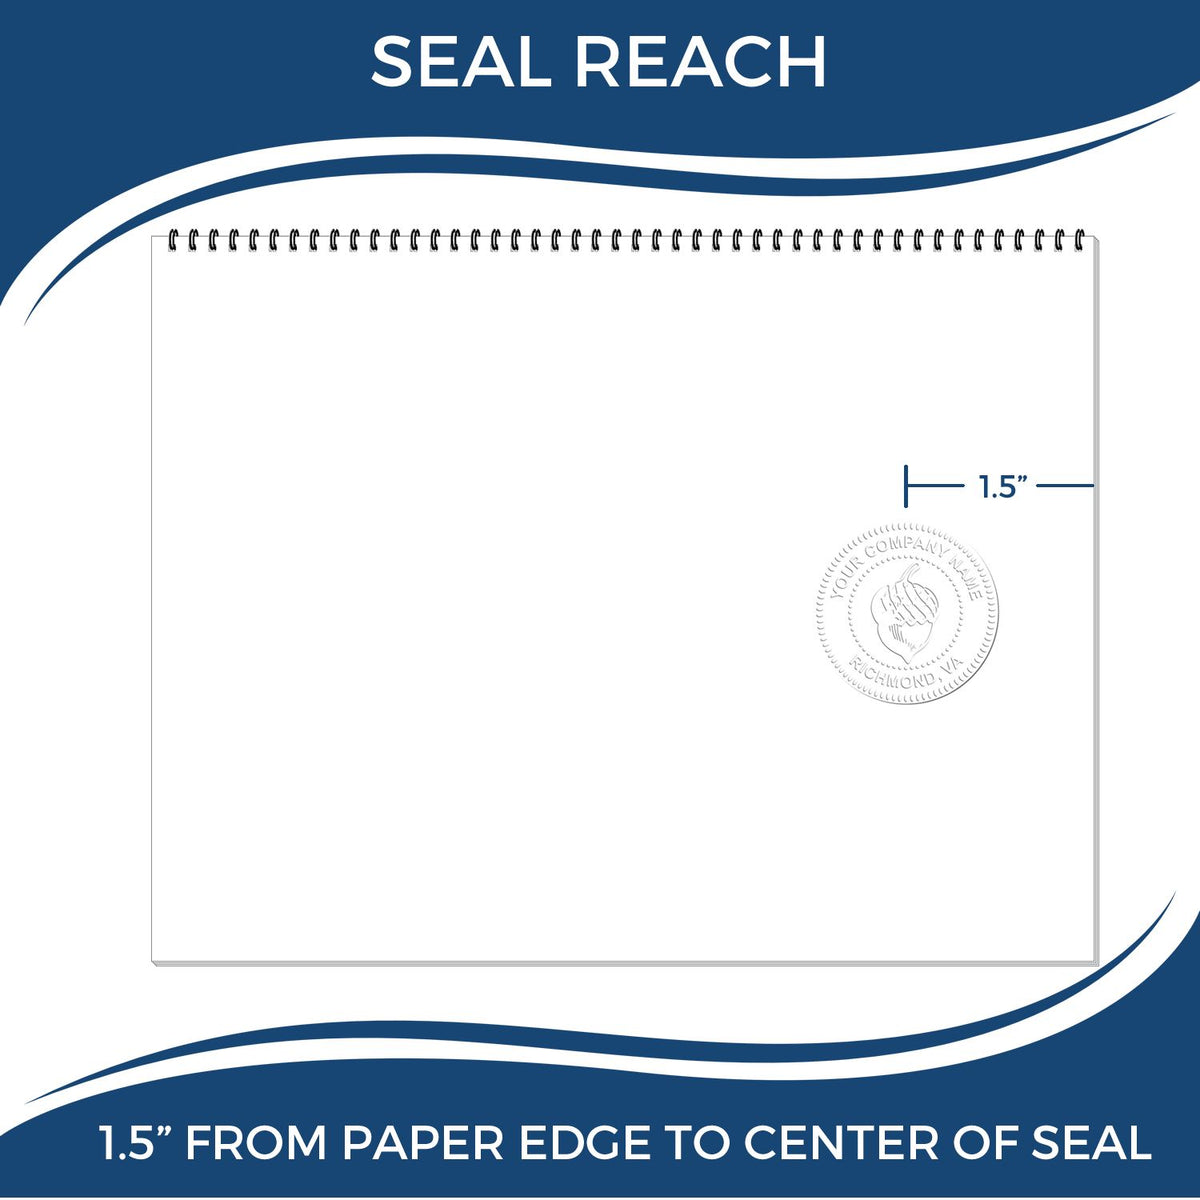 An infographic showing the seal reach which is represented by a ruler and a miniature seal image of the Gift Rhode Island Landscape Architect Seal